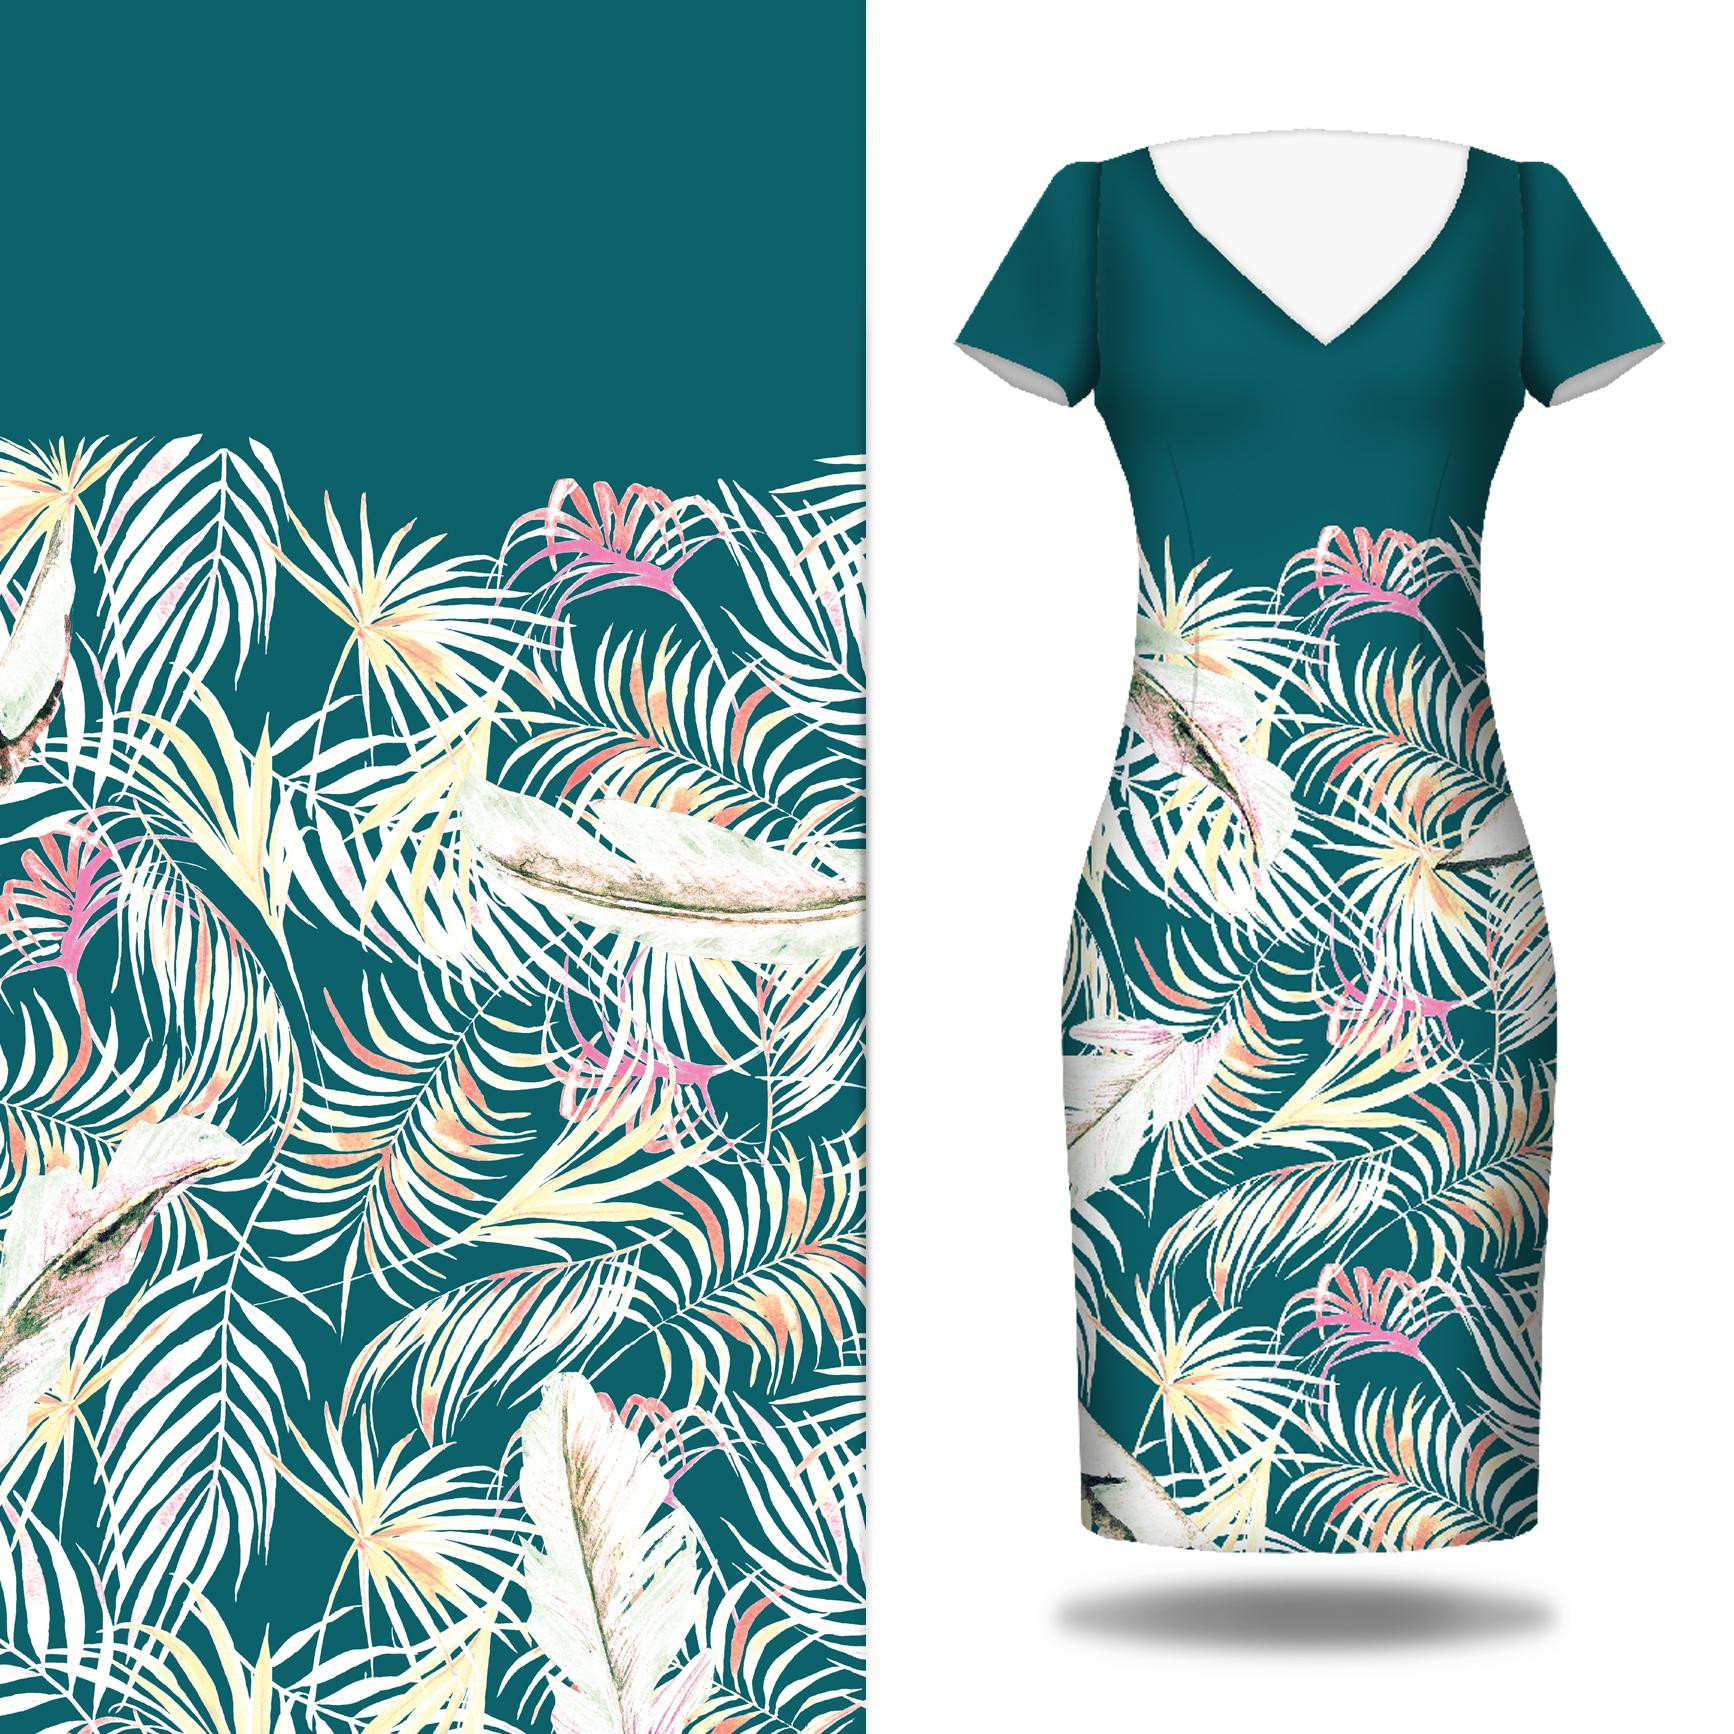 LEAVES AND FEATHERS - Kleid-Panel TE210